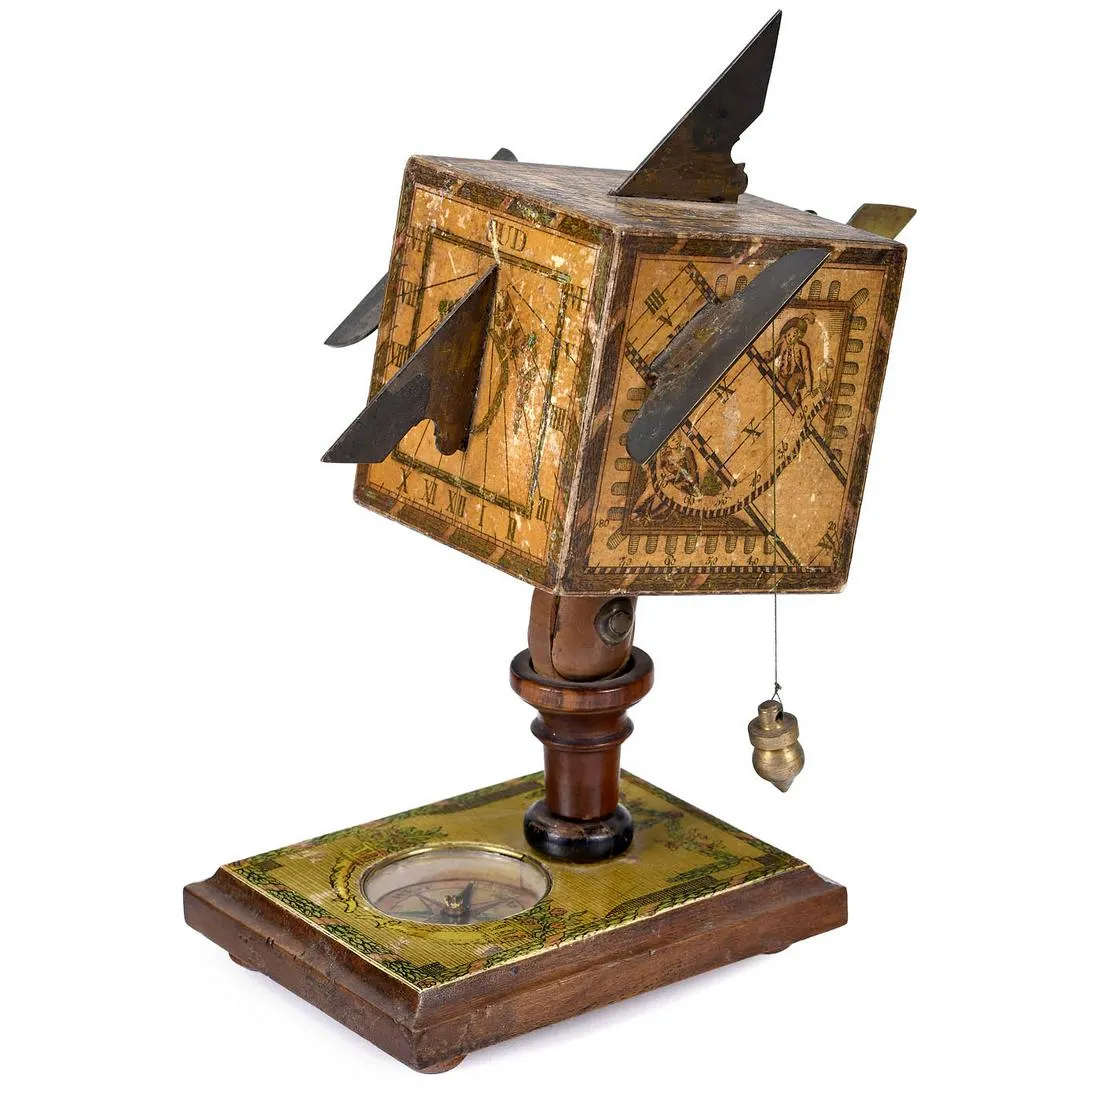 Circa-1800 cube sundial by David Beringer of Nuremberg, $3,336. Image courtesy of Auction Team Breker and LiveAuctioneers